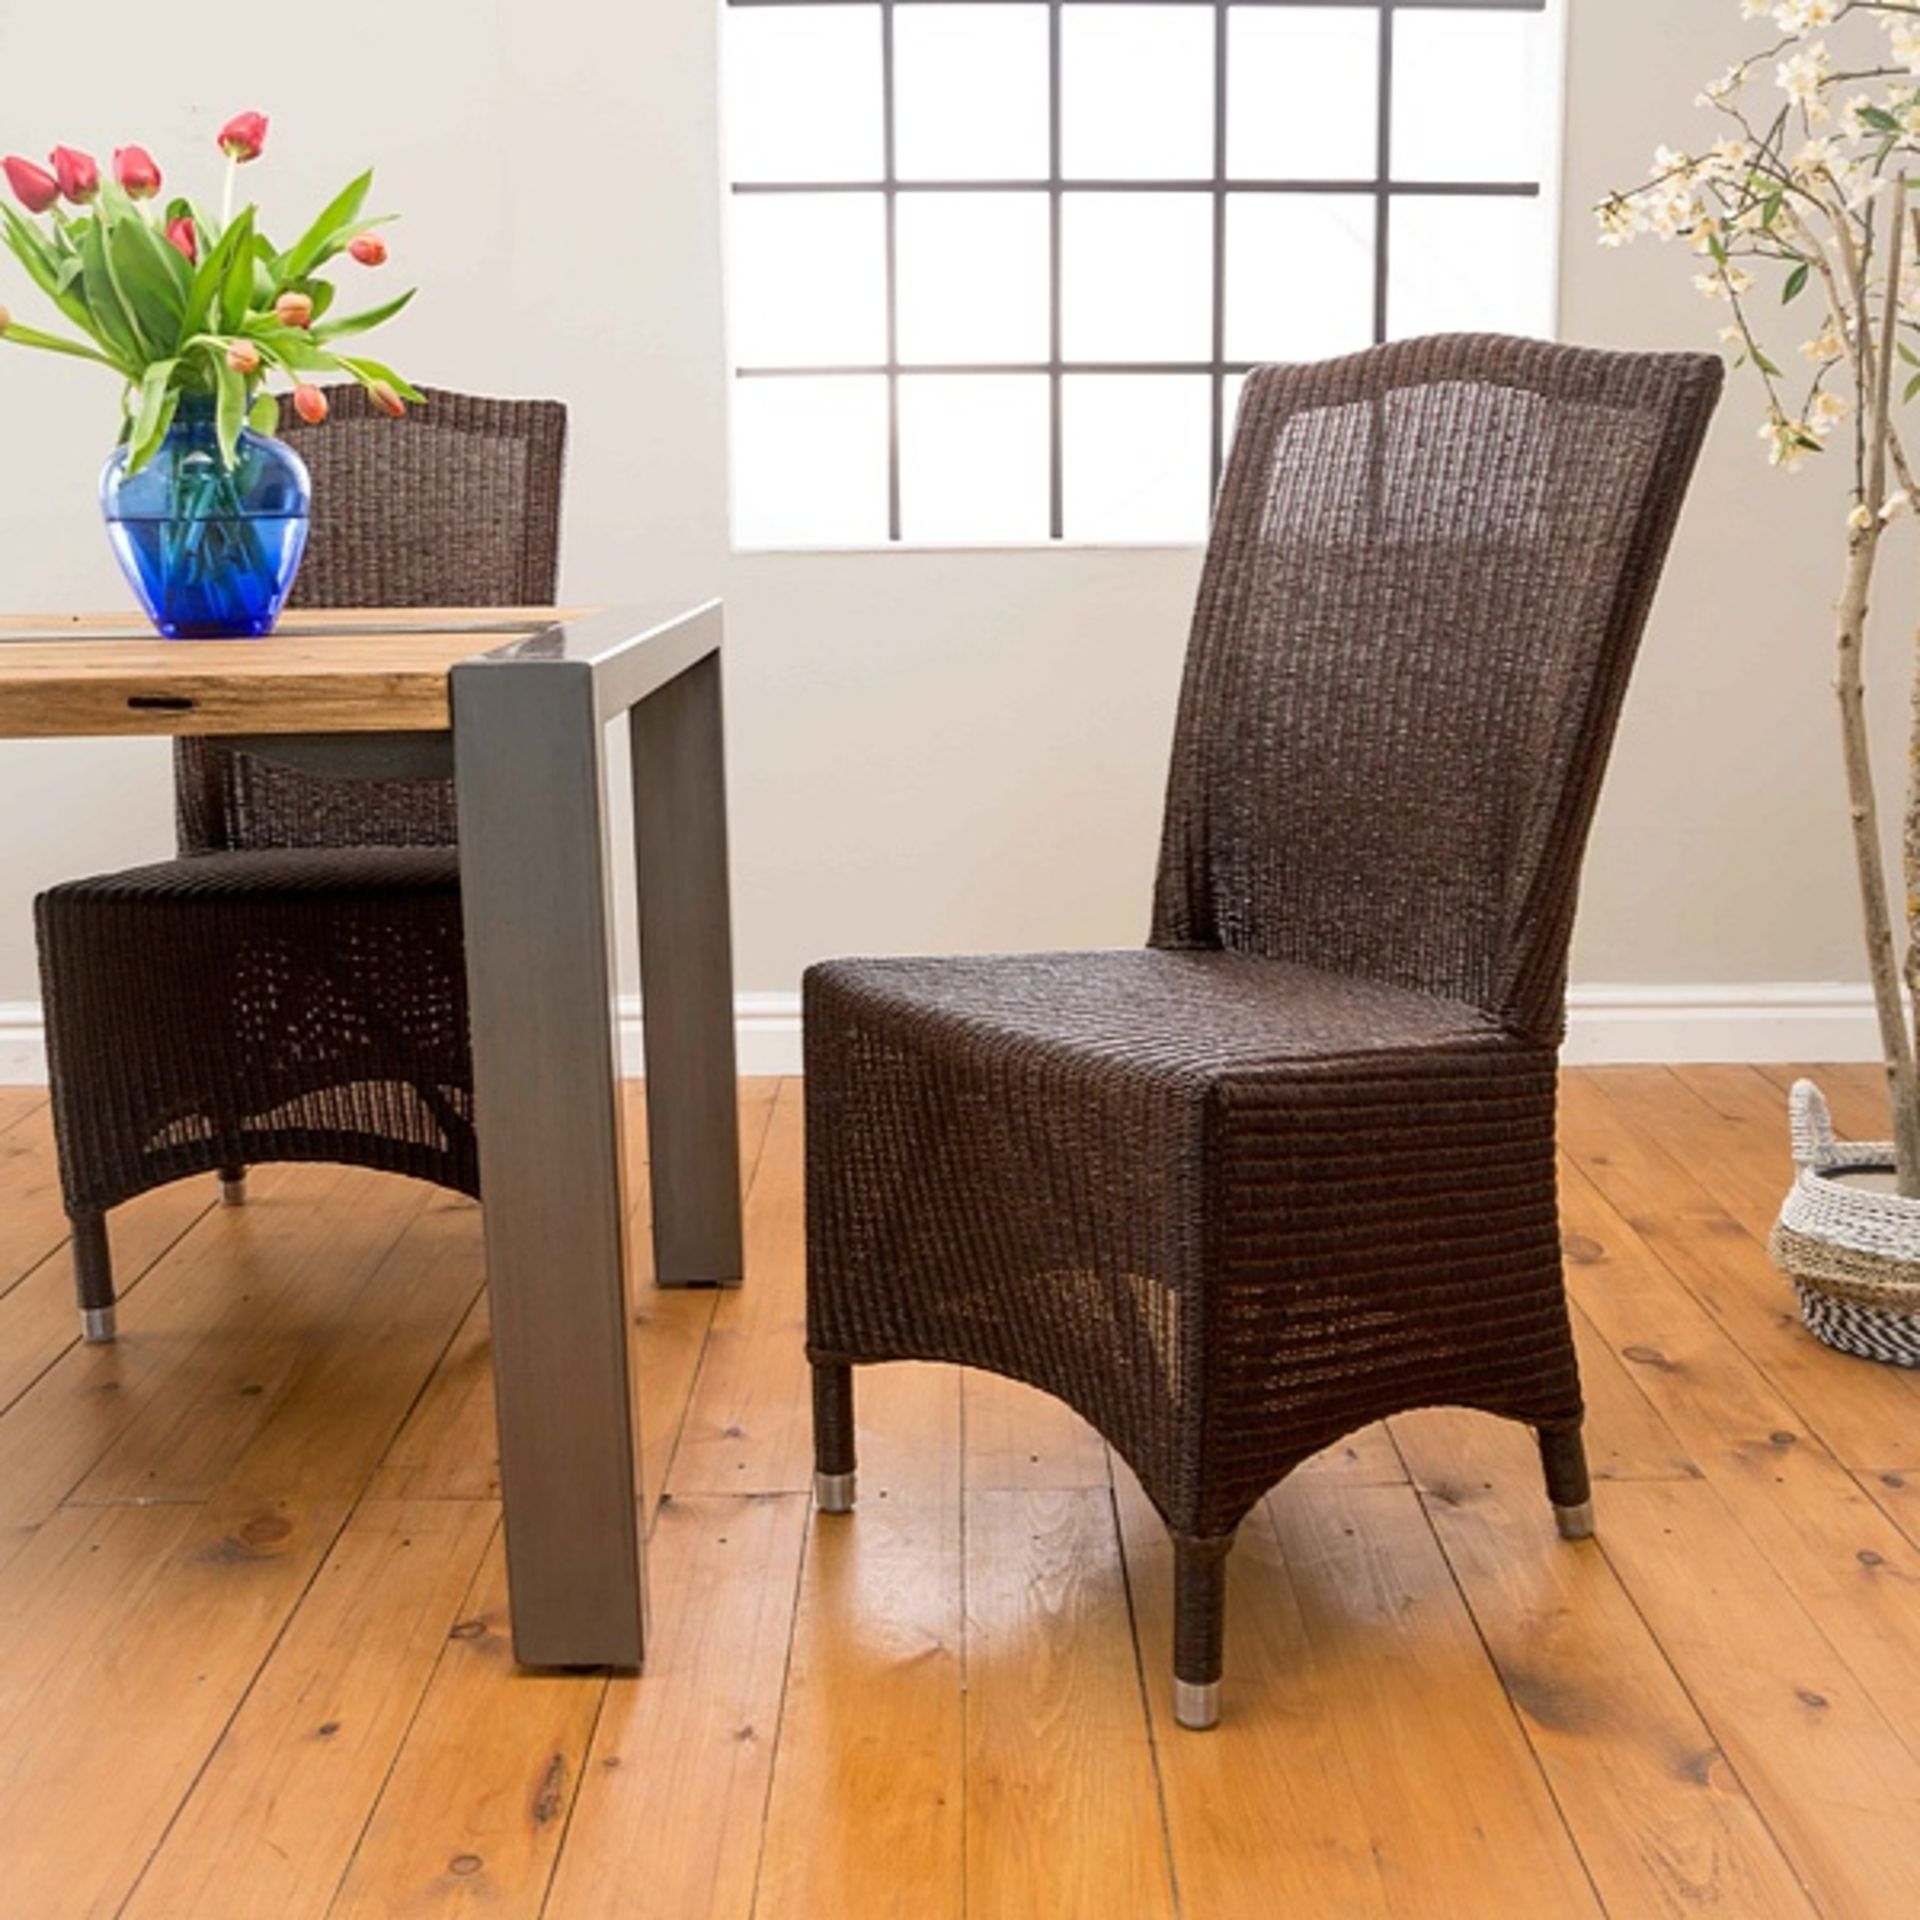 A Pair Of Classic Lloyd Loom Chairs The Pimlico Is At Home In The Dining Room And Comfortable As A - Image 2 of 5